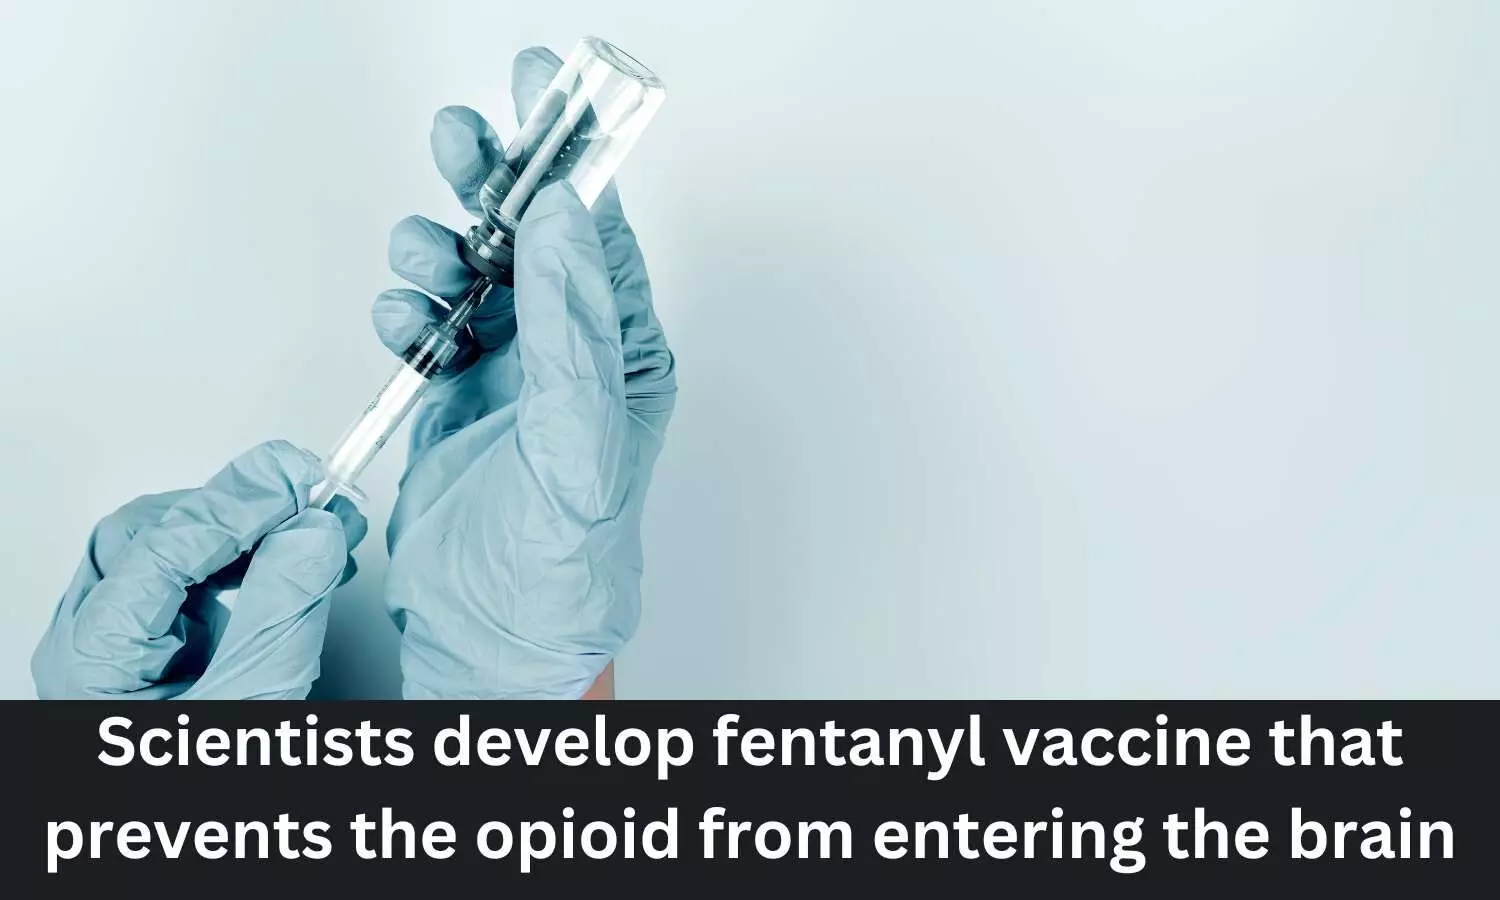 Scientists develop Fentanyl vaccine that prevents opioid from entering brain